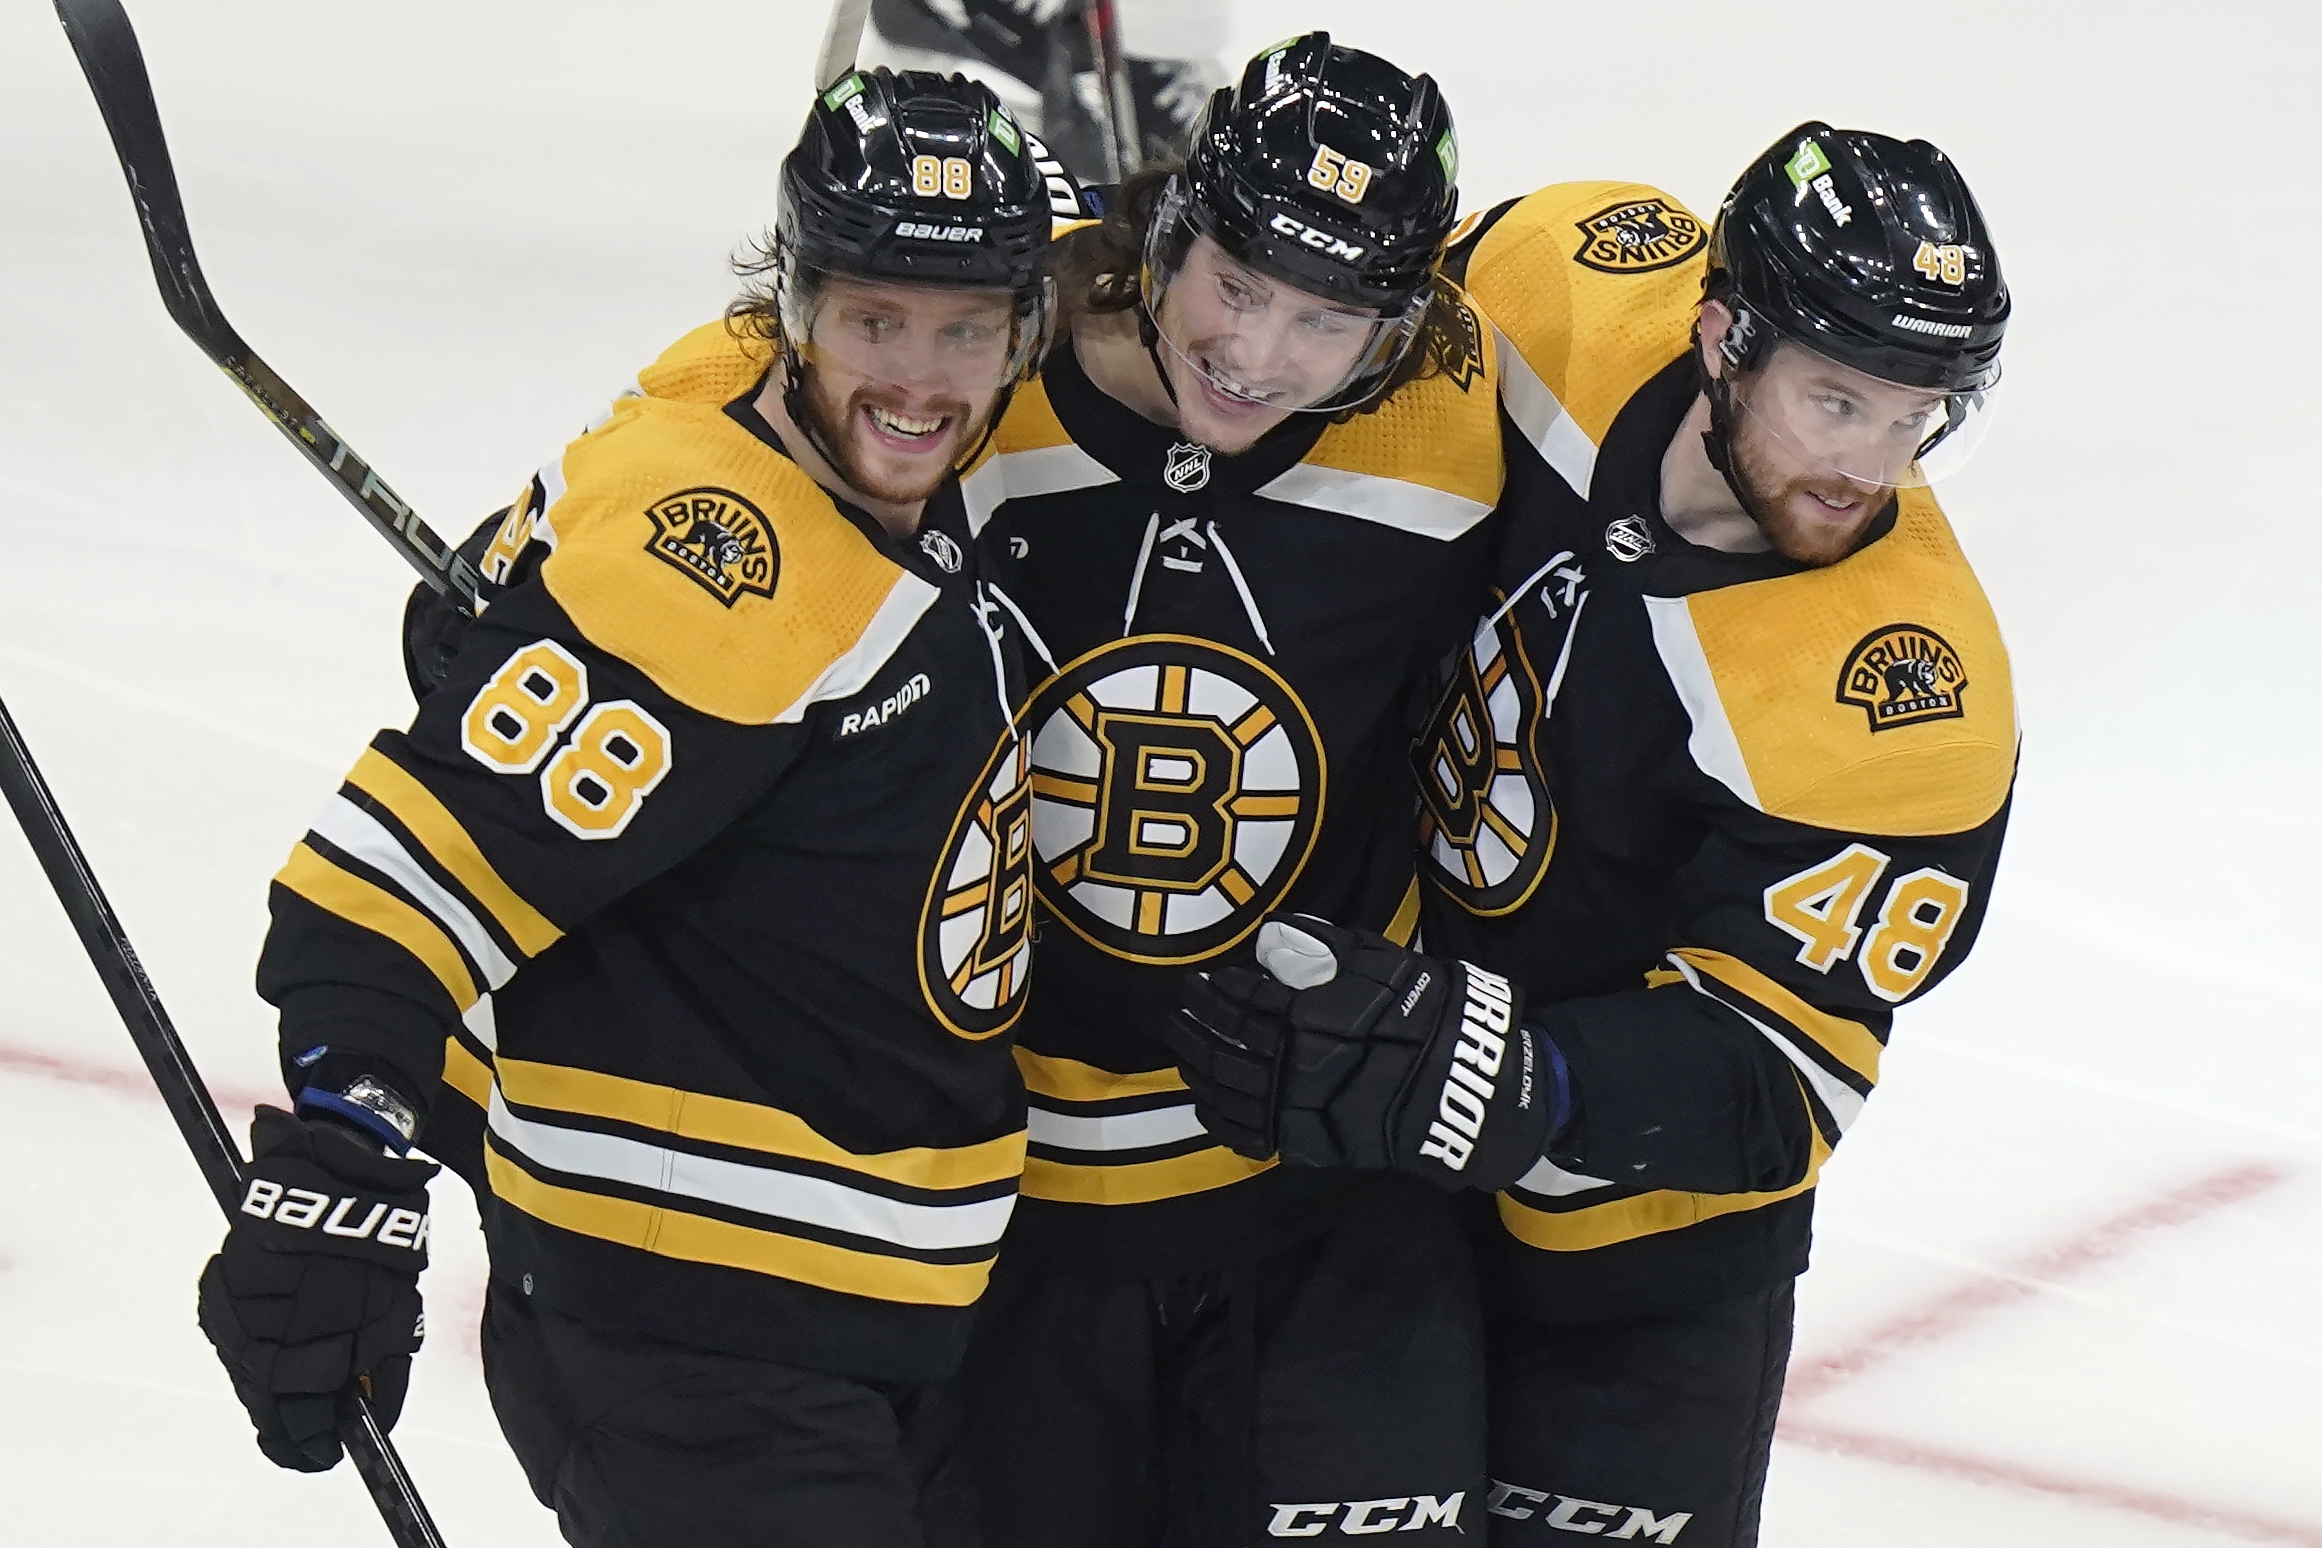 Looking Back At Some Of Bruins Star David Pastrnak's Top Threads